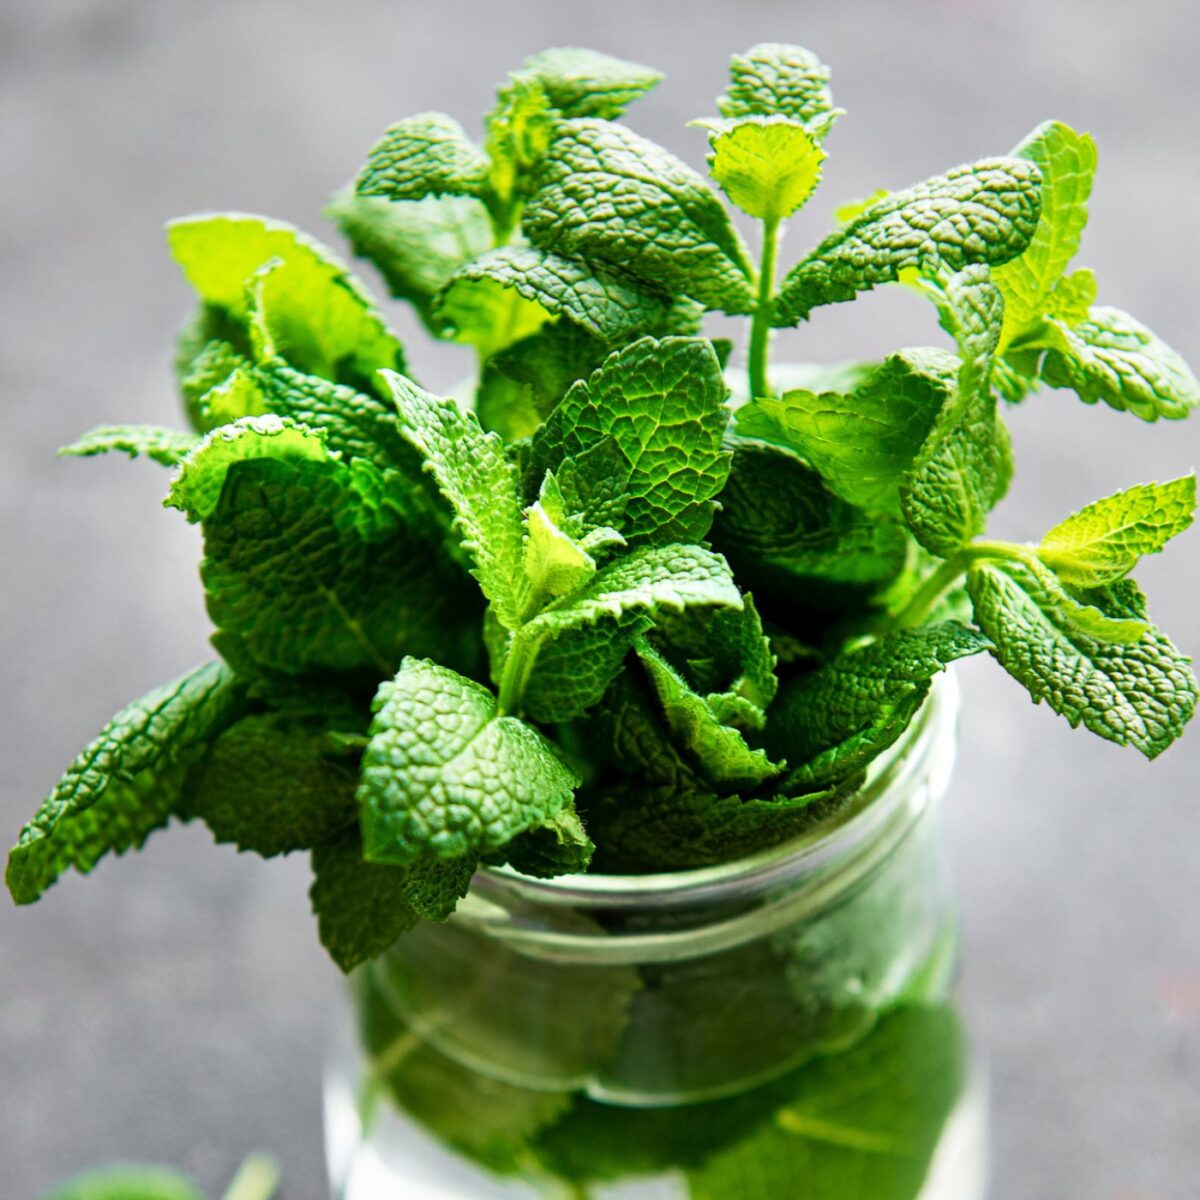 How To Store Mint Leaves Without Fridge